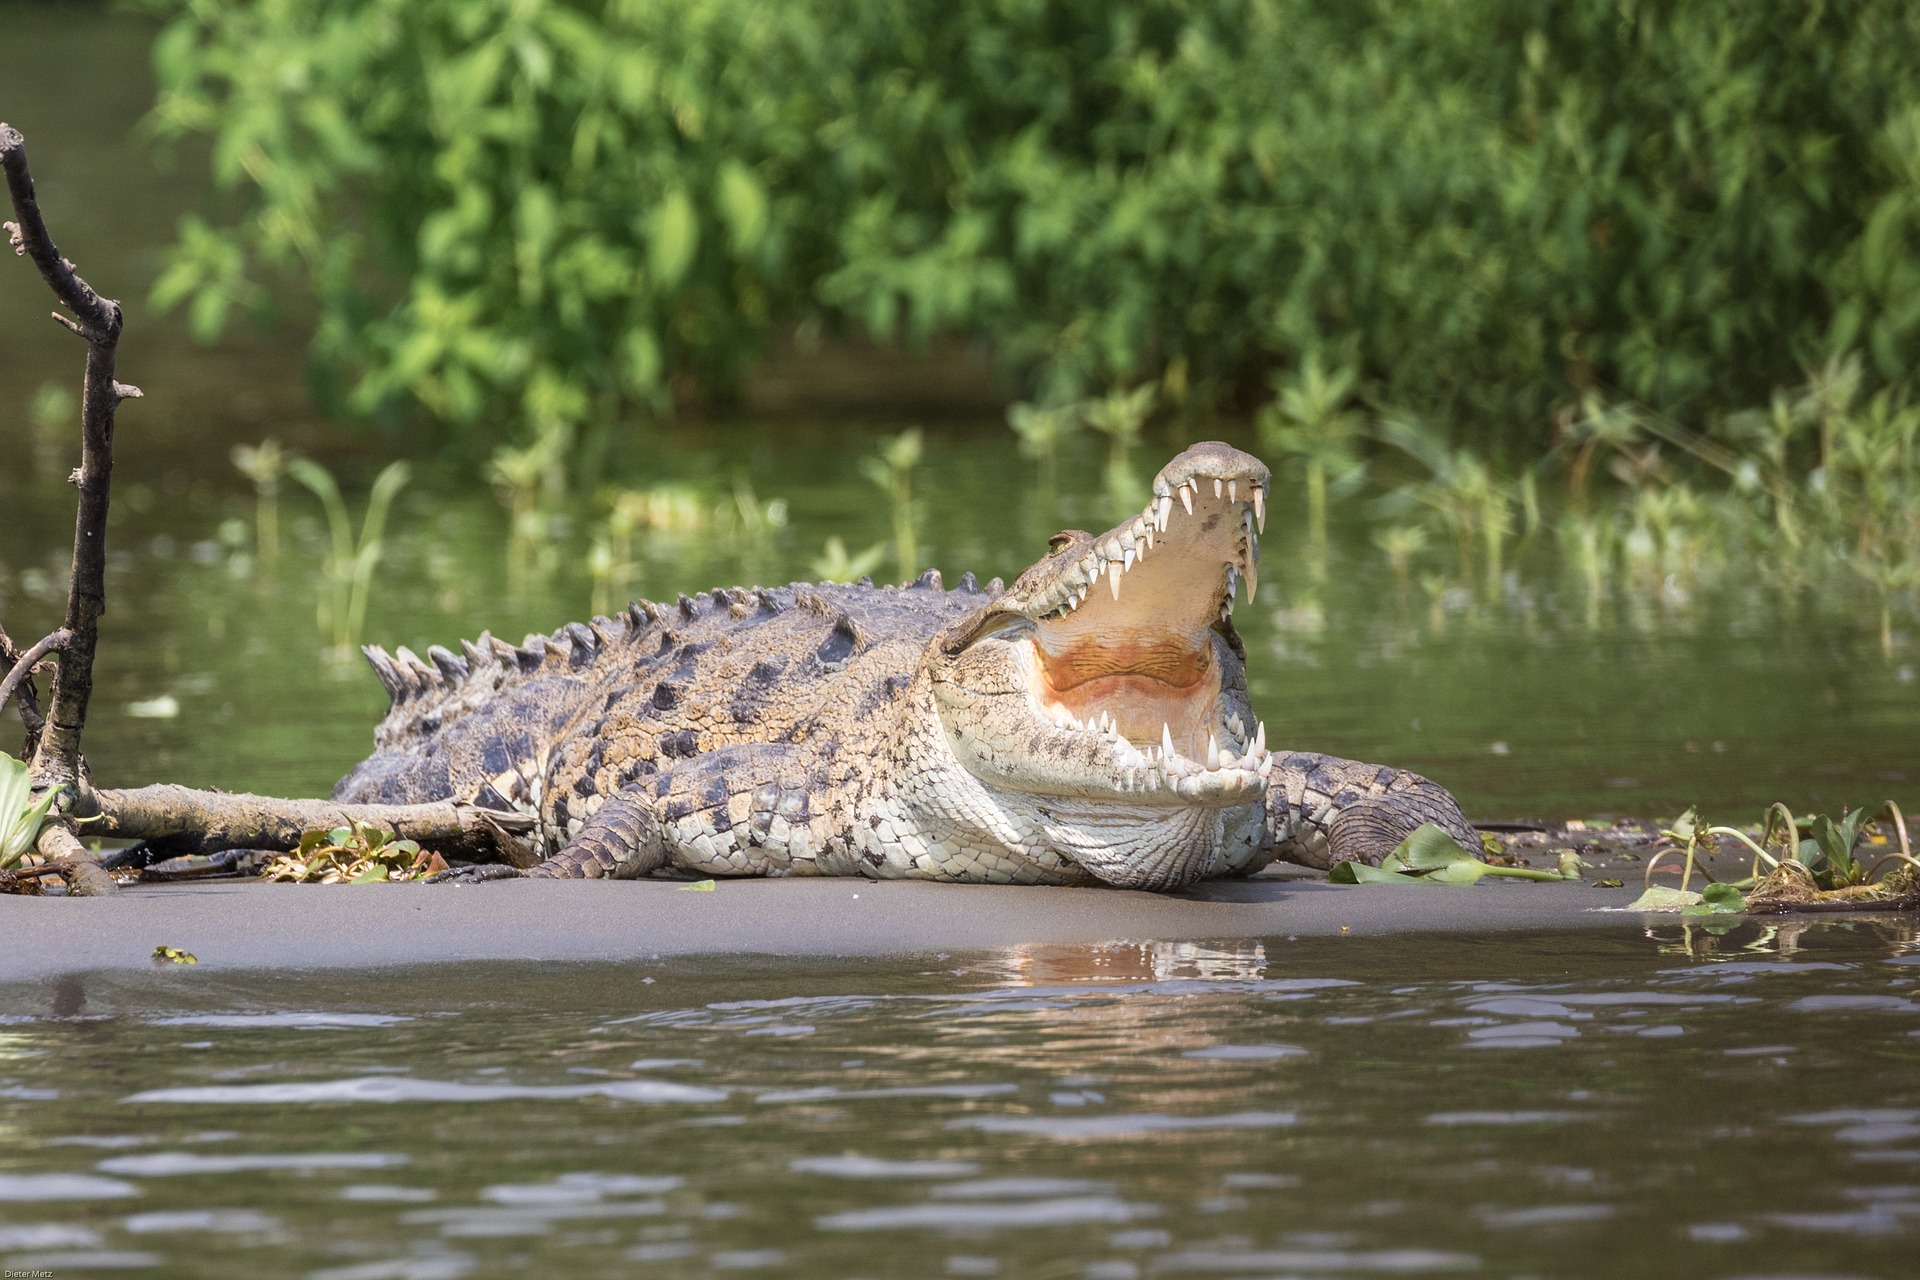 A large crocodile in the water.